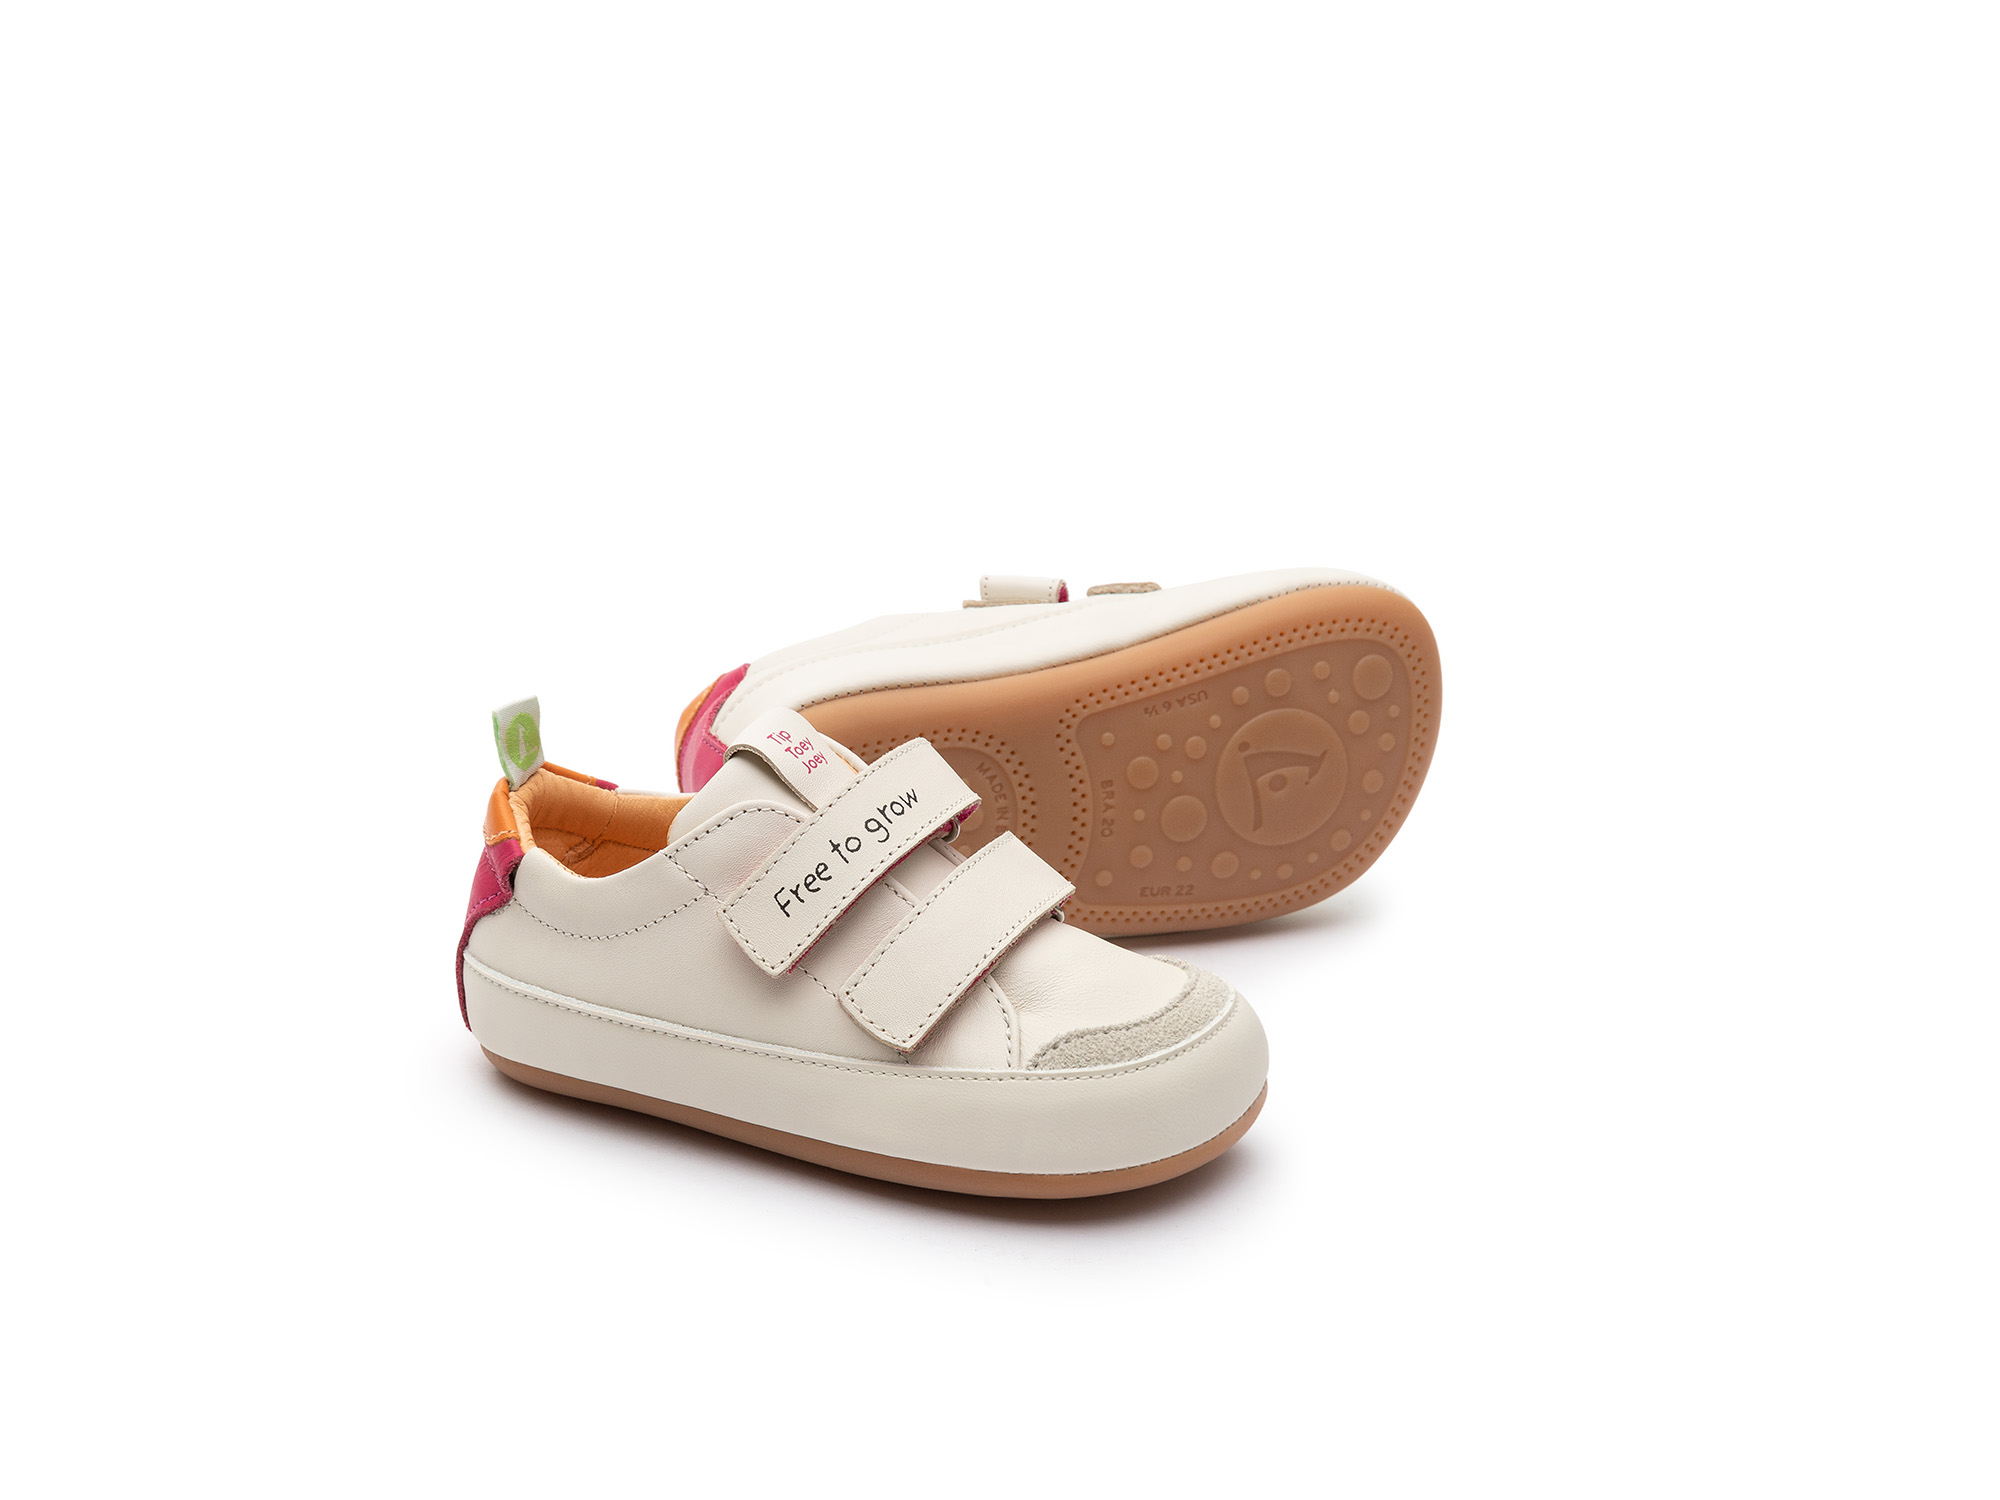 UP & GO Sneakers for Girls Bossy Play | Tip Toey Joey - Australia - 0